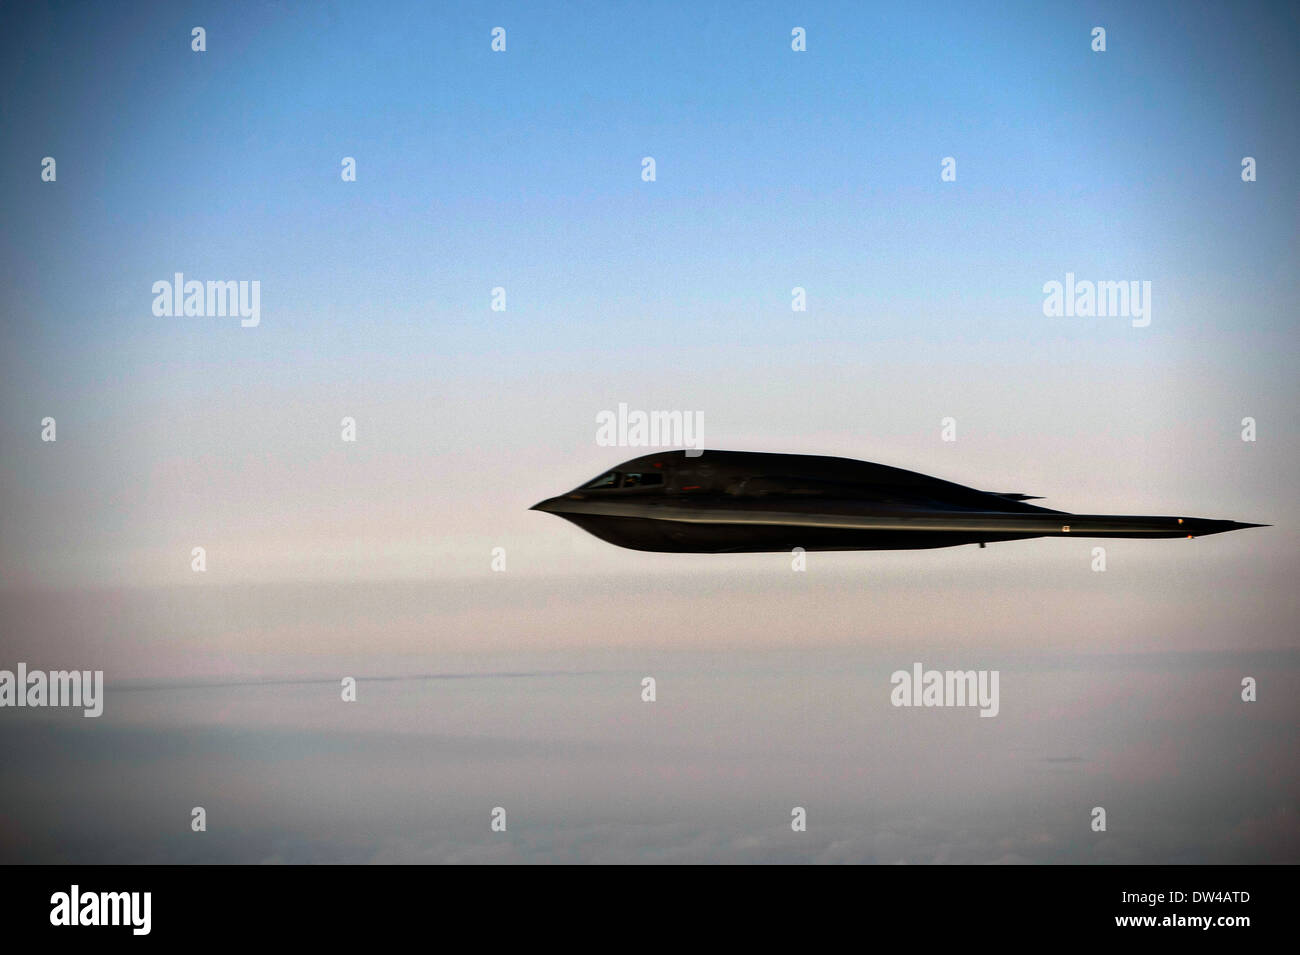 A US Air Force B-2 Spirit stealth bomber aircraft flies over Whiteman Air Force Base February 20, 2014 in Knob Noster, MO. Stock Photo